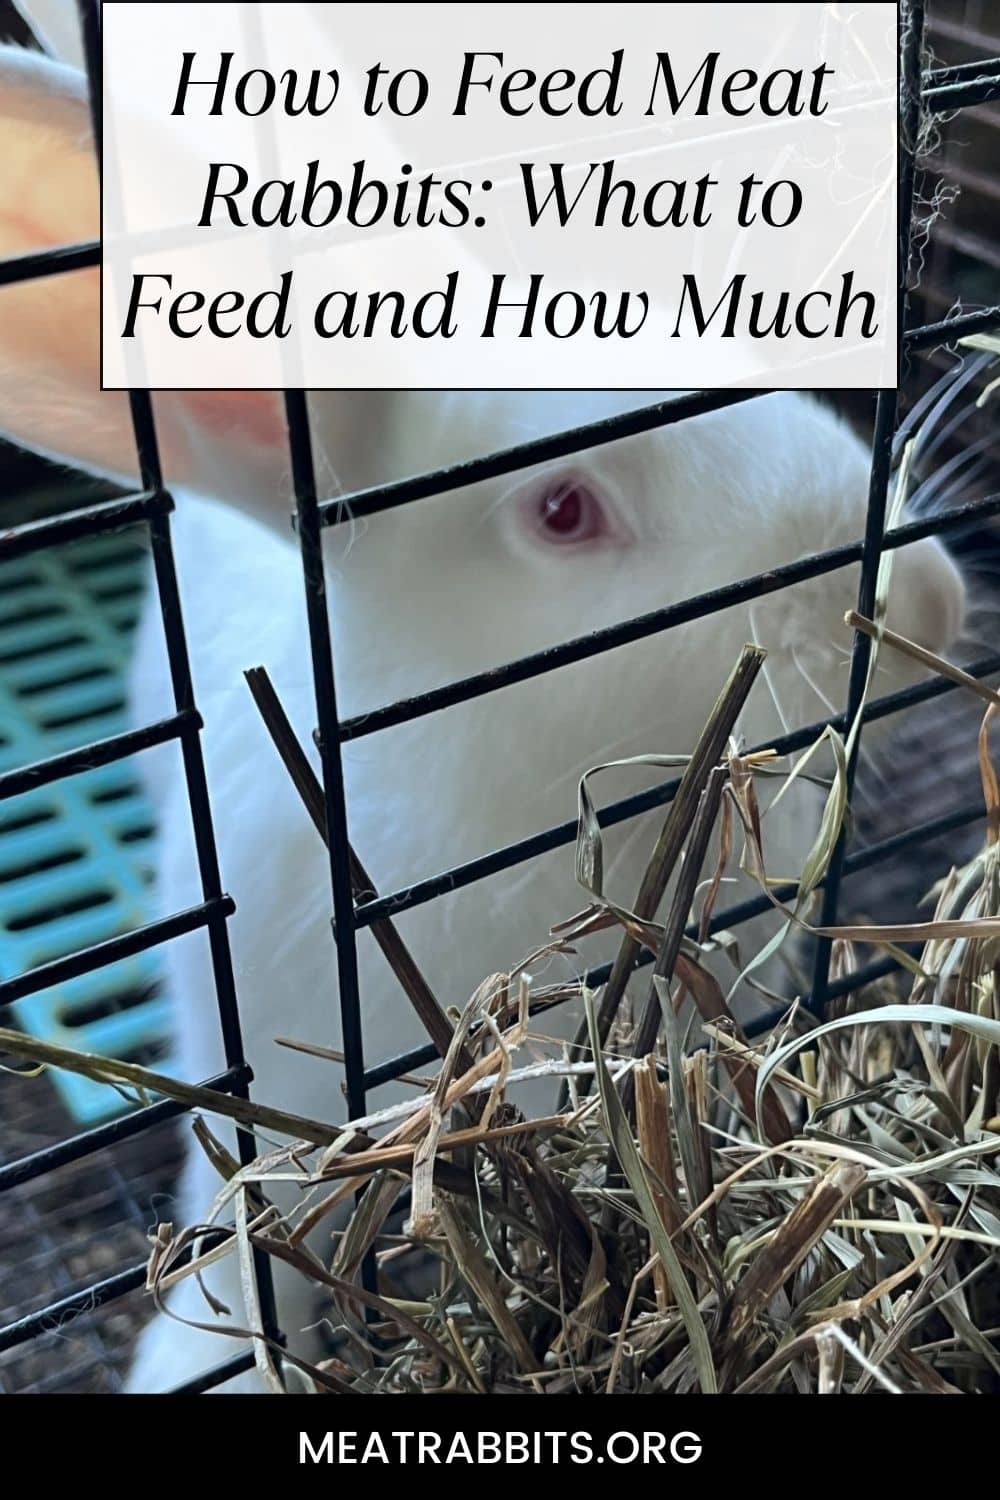 How to Feed Meat Rabbits: What to Feed and How Much pinterest image.